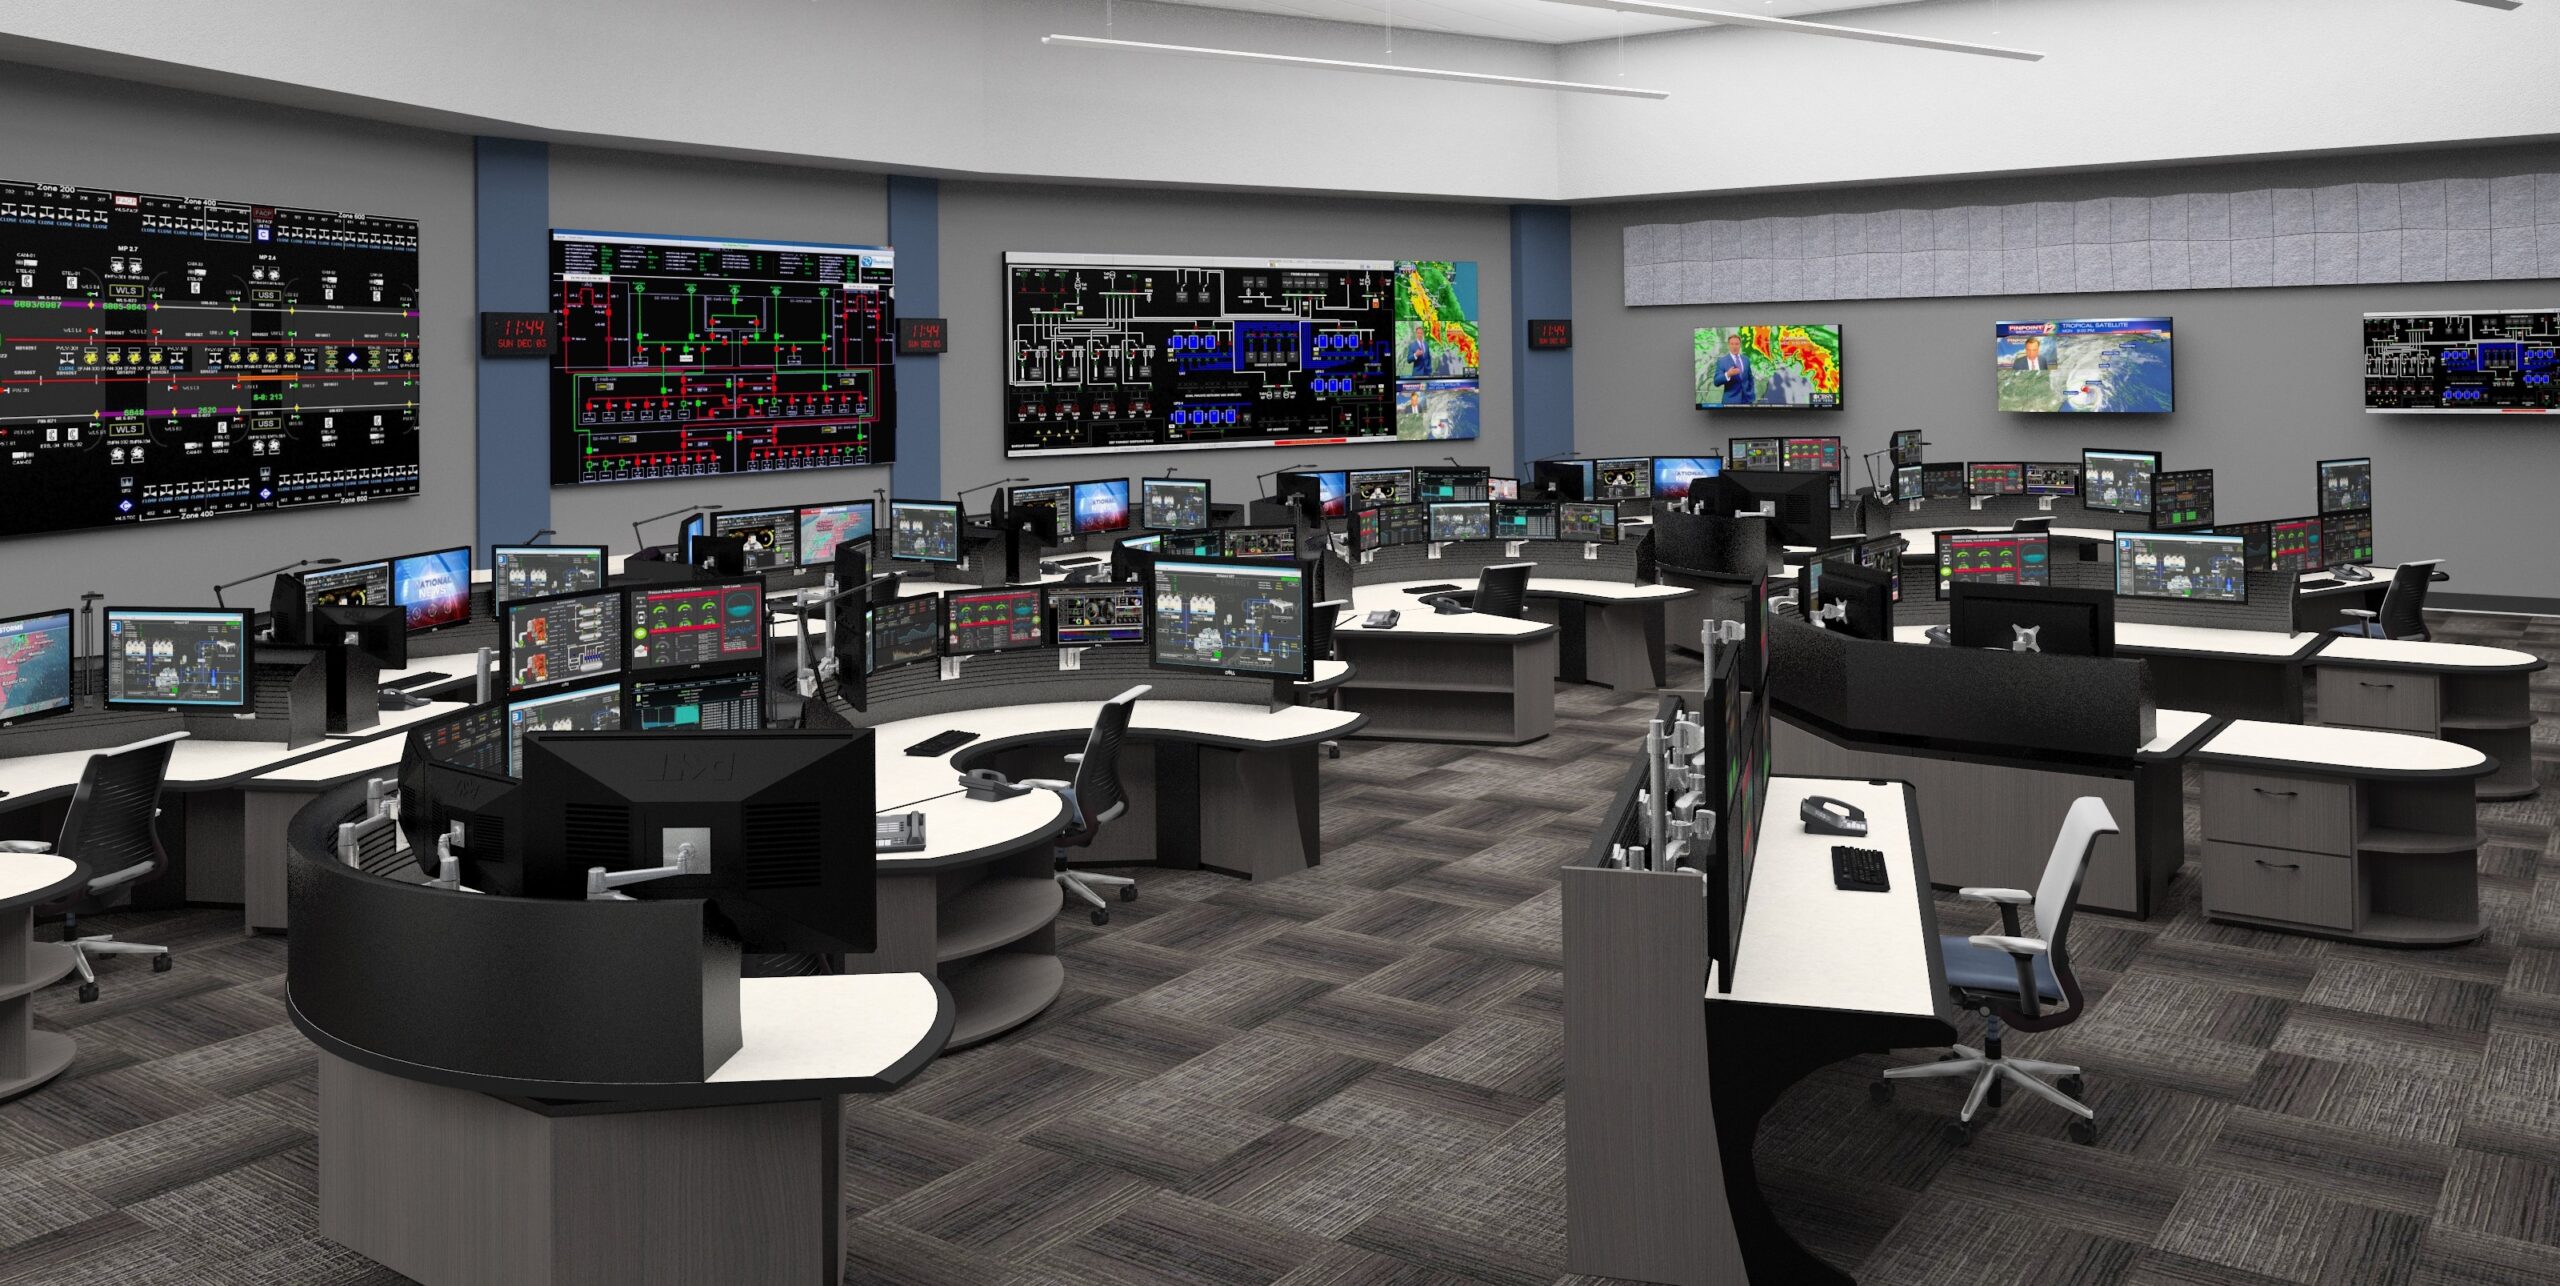 Completed Control Room designed and built by Robert E. Lamb, with three video walls and multiple sit-stand consoles for operators